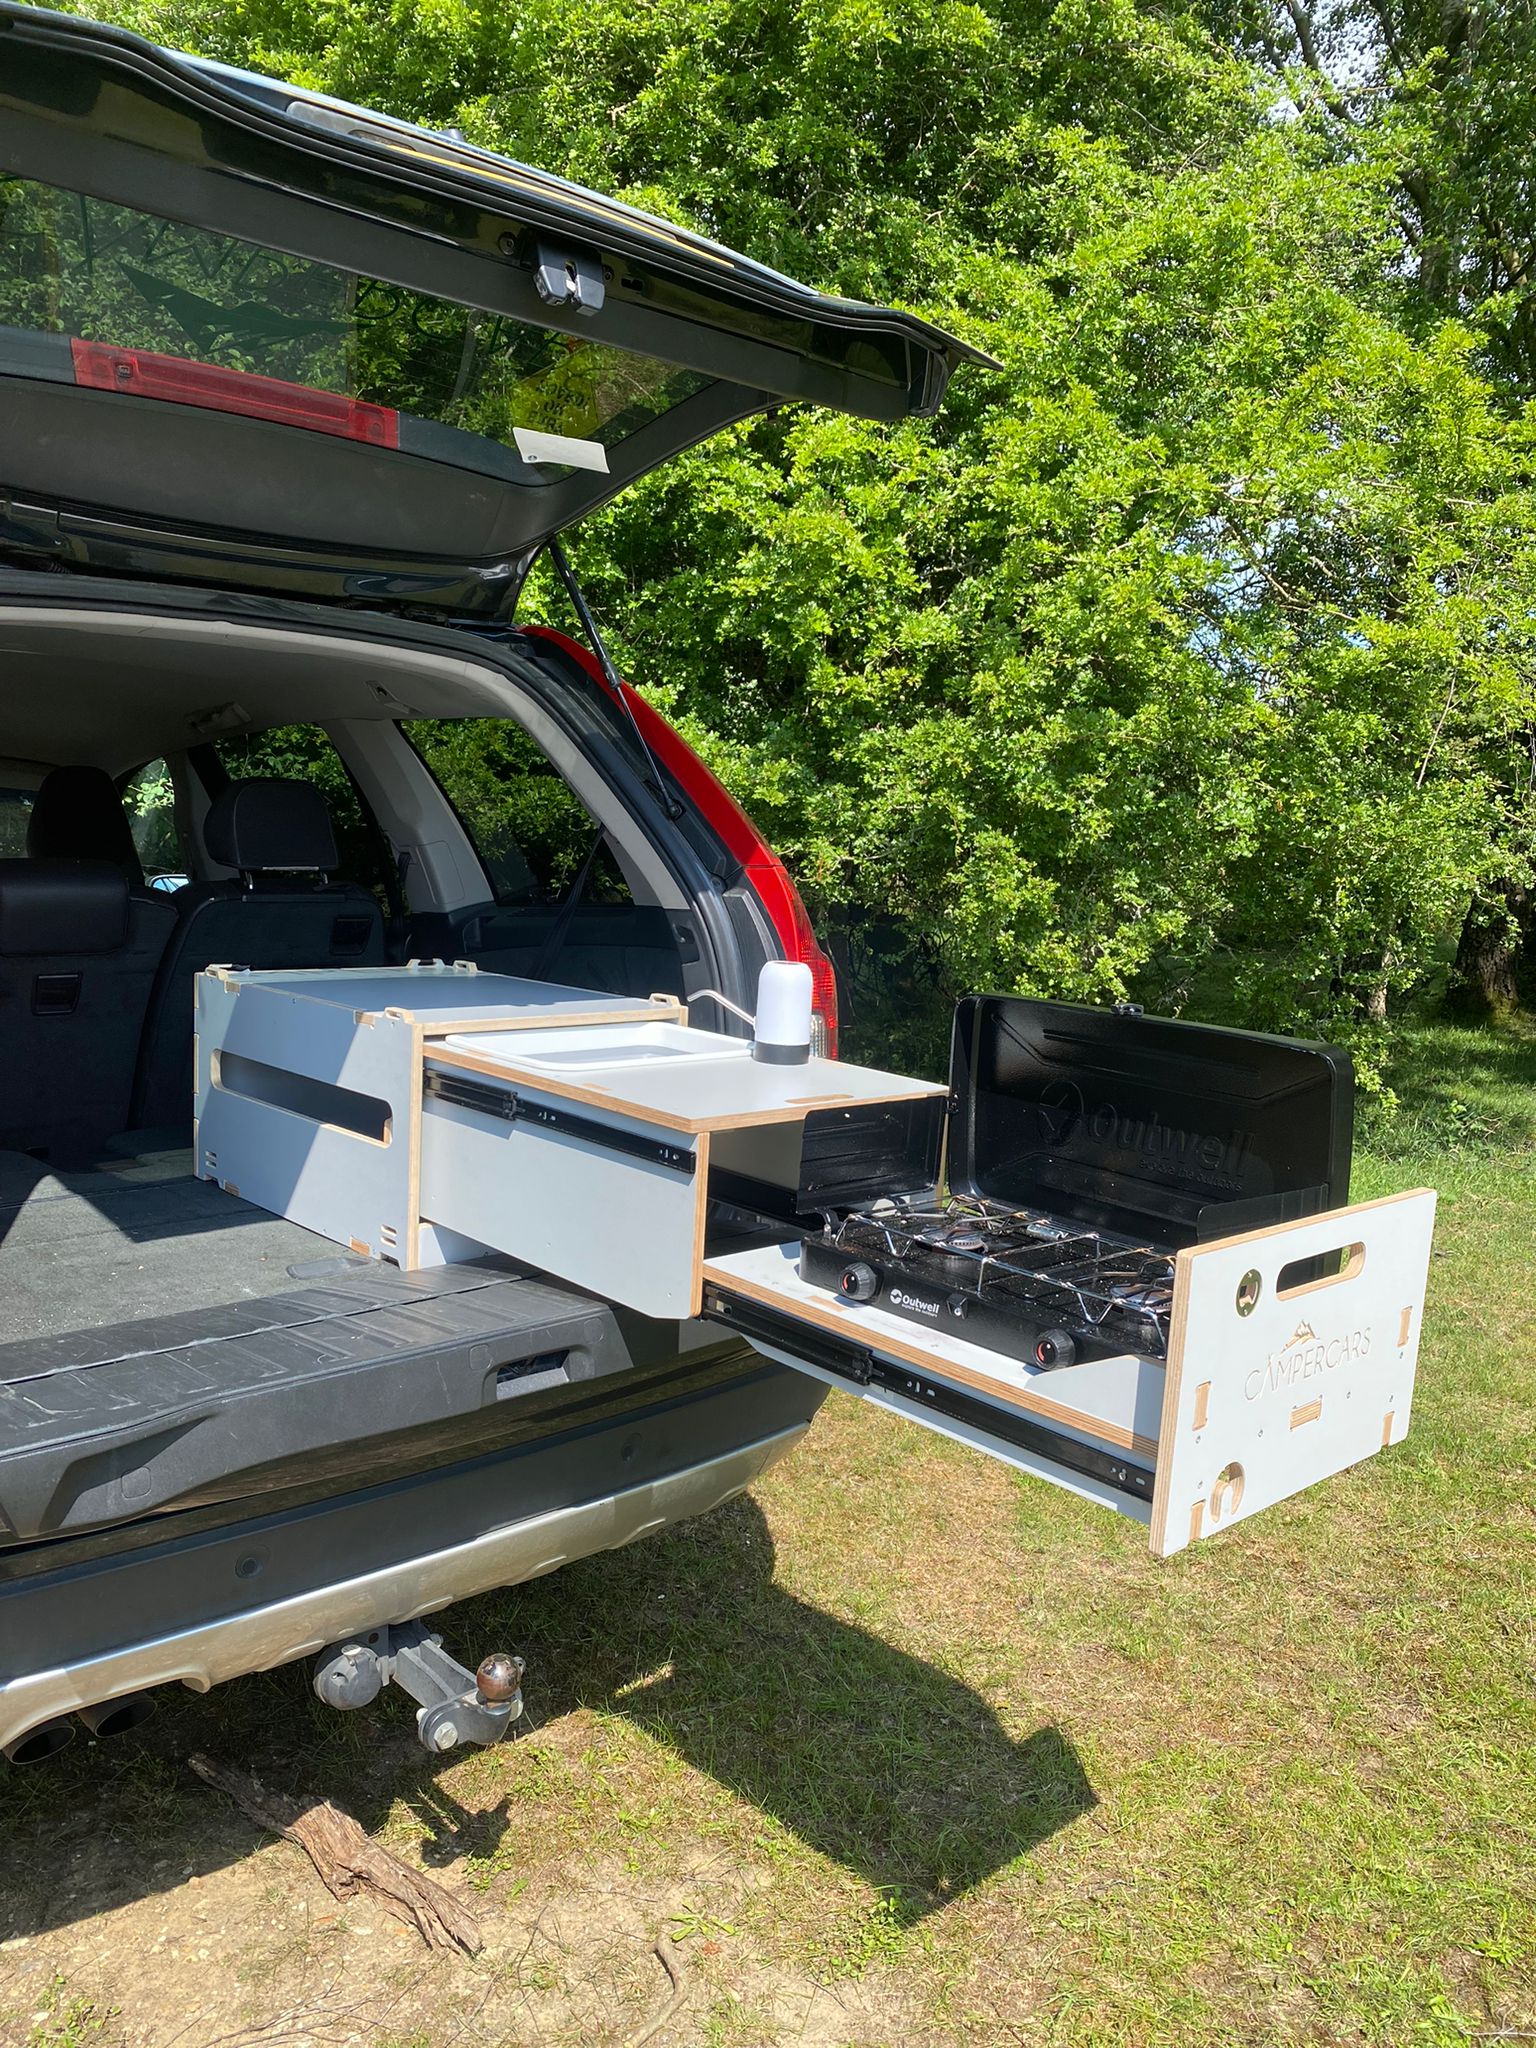 CampCook - Removable Car Kitchen - Camping and Car Kitchen Systems